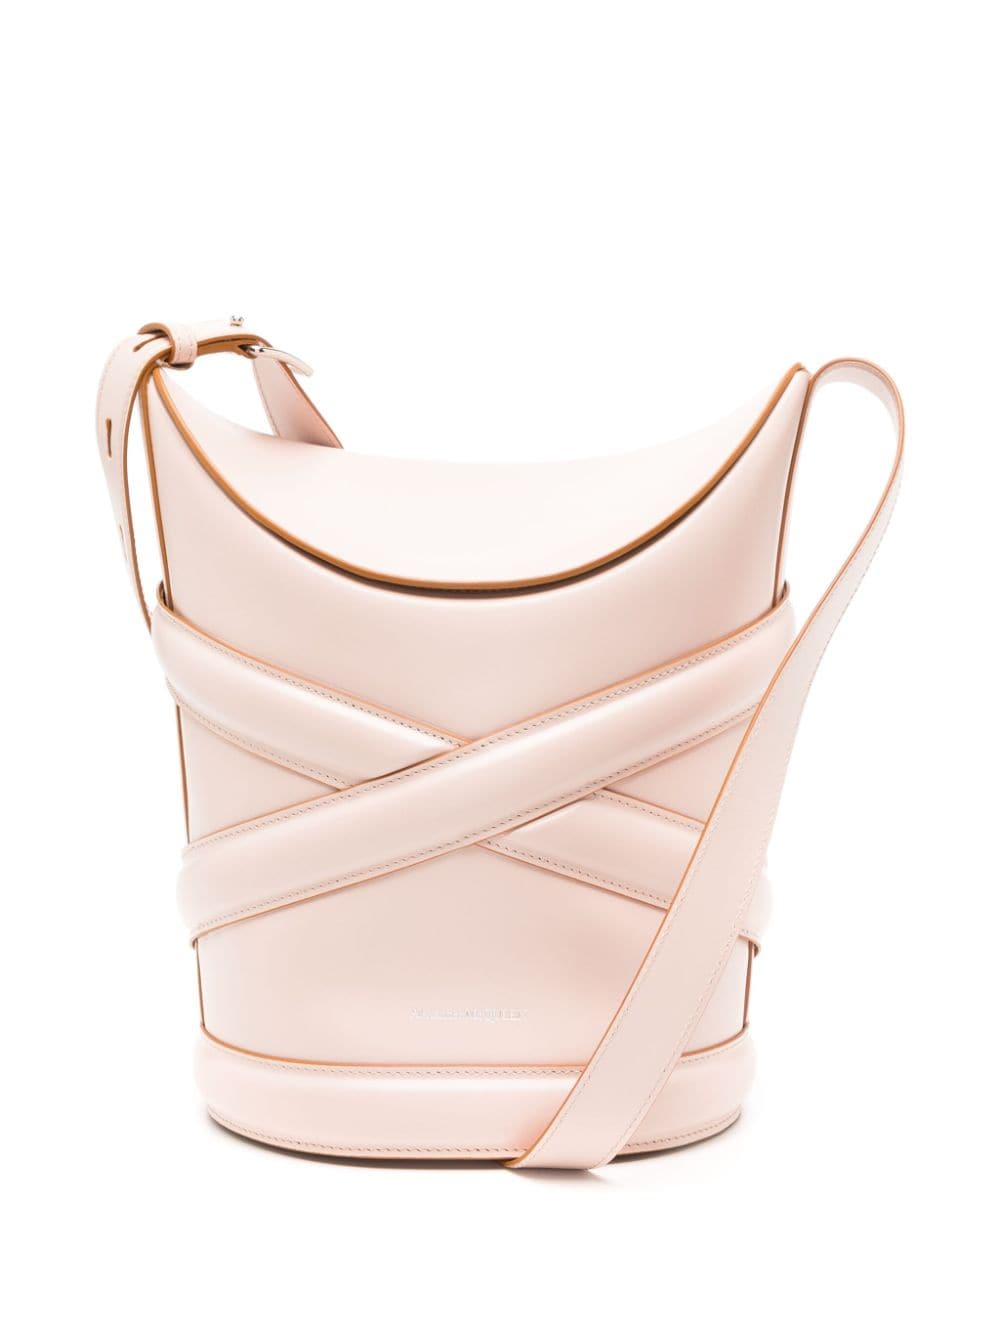 Alexander McQueen Pre-Owned The Curve leather bucket shoulder bag - Pink von Alexander McQueen Pre-Owned